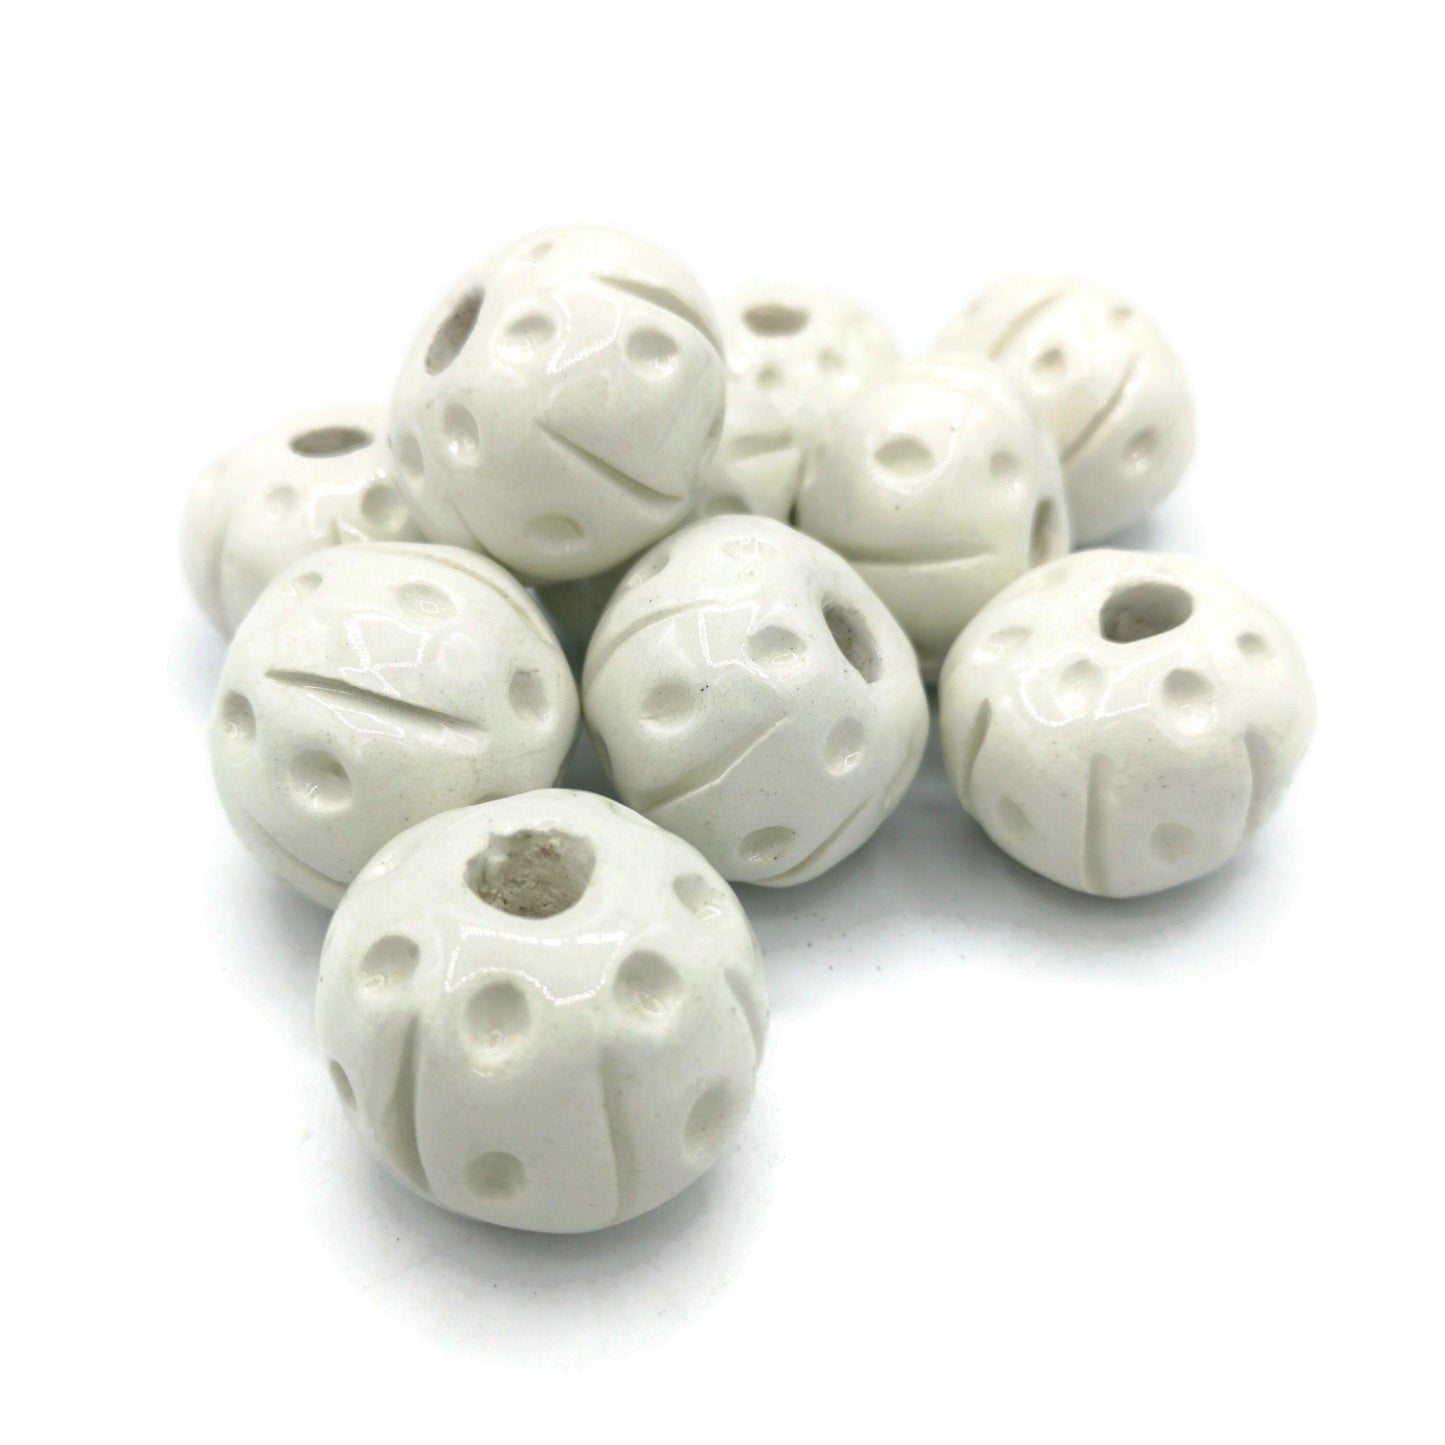 1Pc 35mm White Large Hole Beads, round beads for bracelets, clay beads for jewelry making supplies, best handmade ceramic beads for macrame - Ceramica Ana Rafael